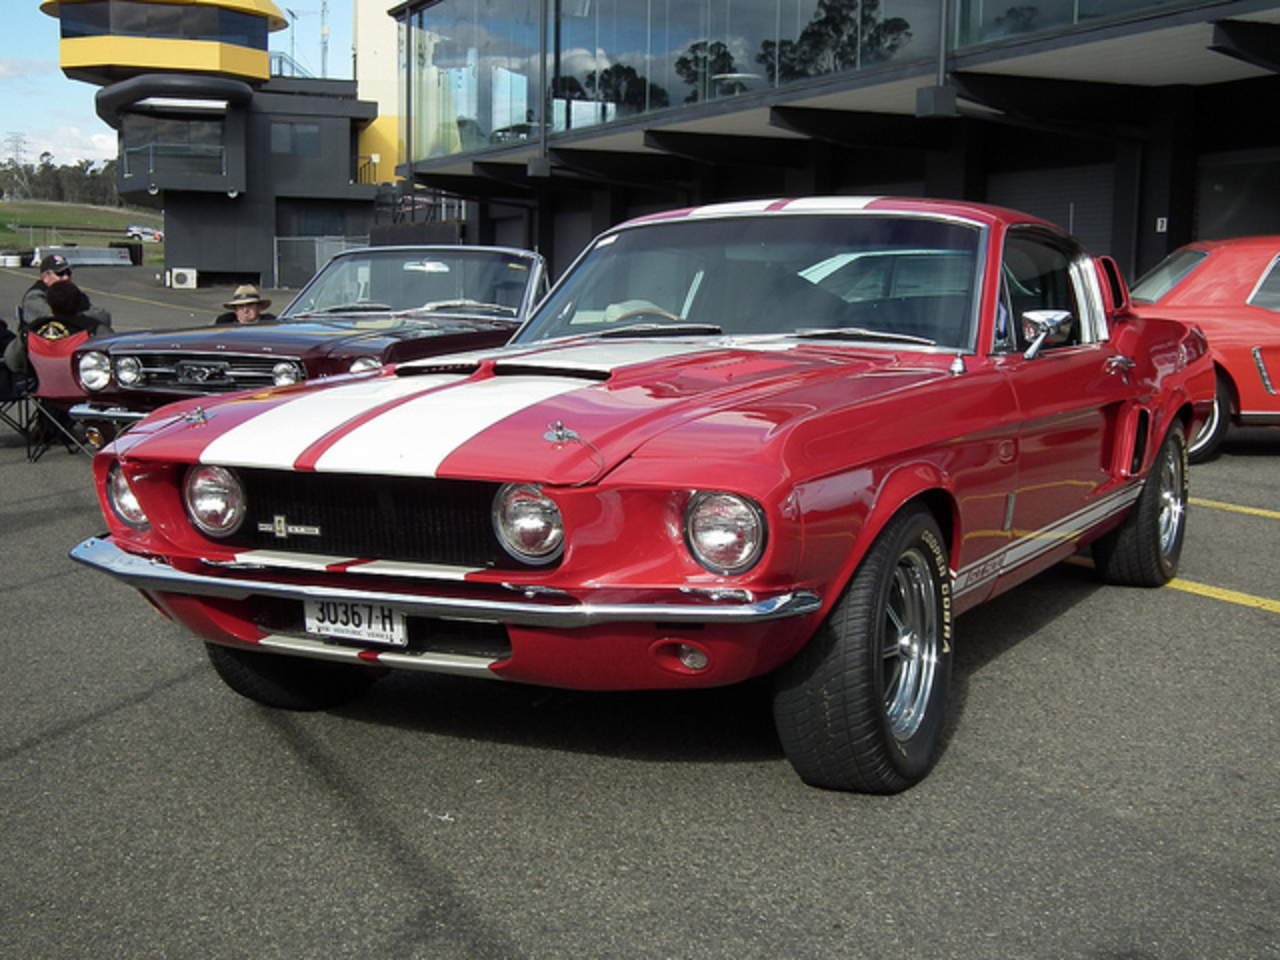 Ford Mustang Shelby GT500 coupé 1967 / Flickr - Partage de photos!